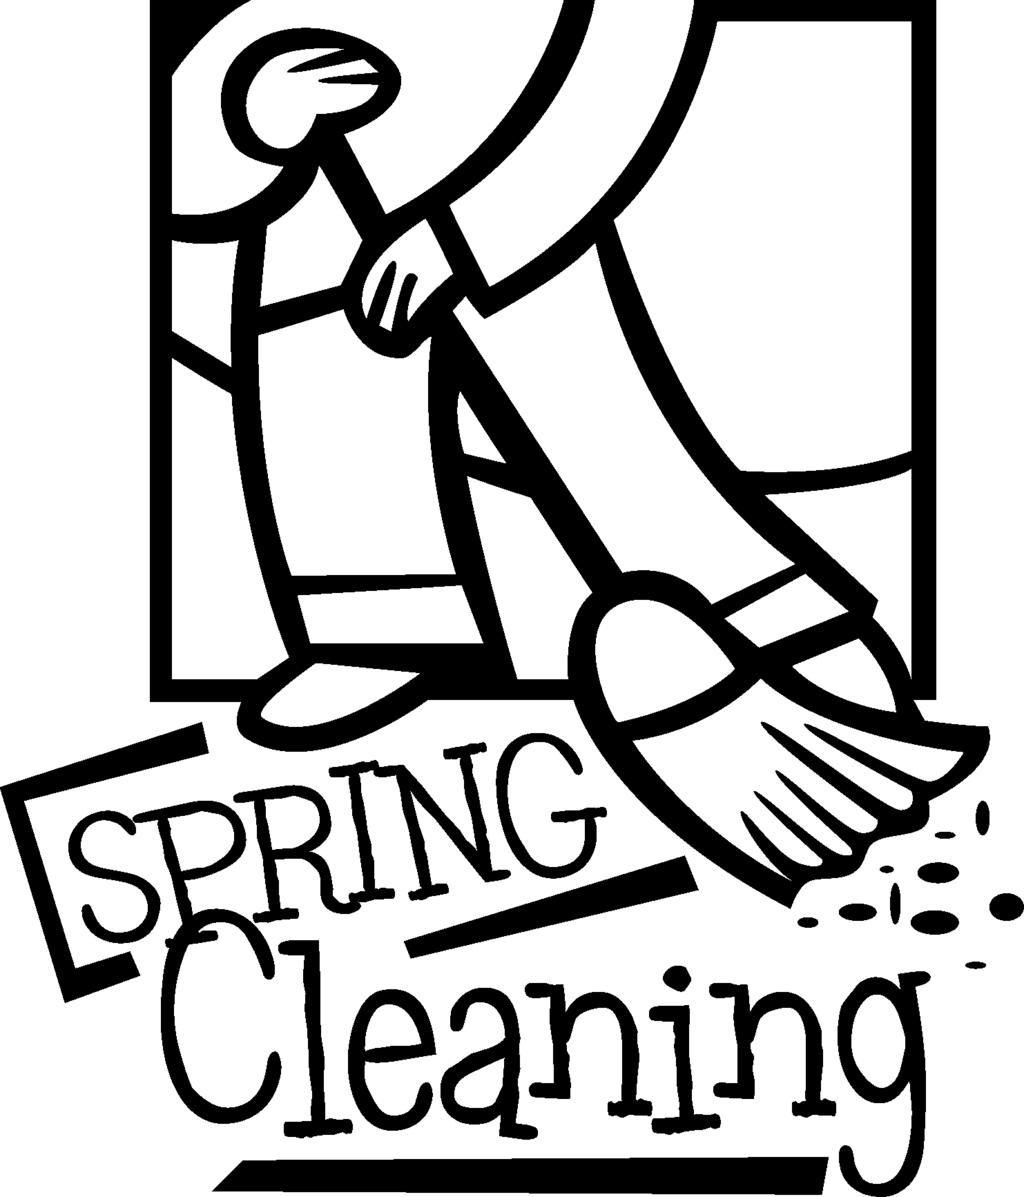 Saturday, May 8 8 am Noon Join us for a church wide clean-up day.